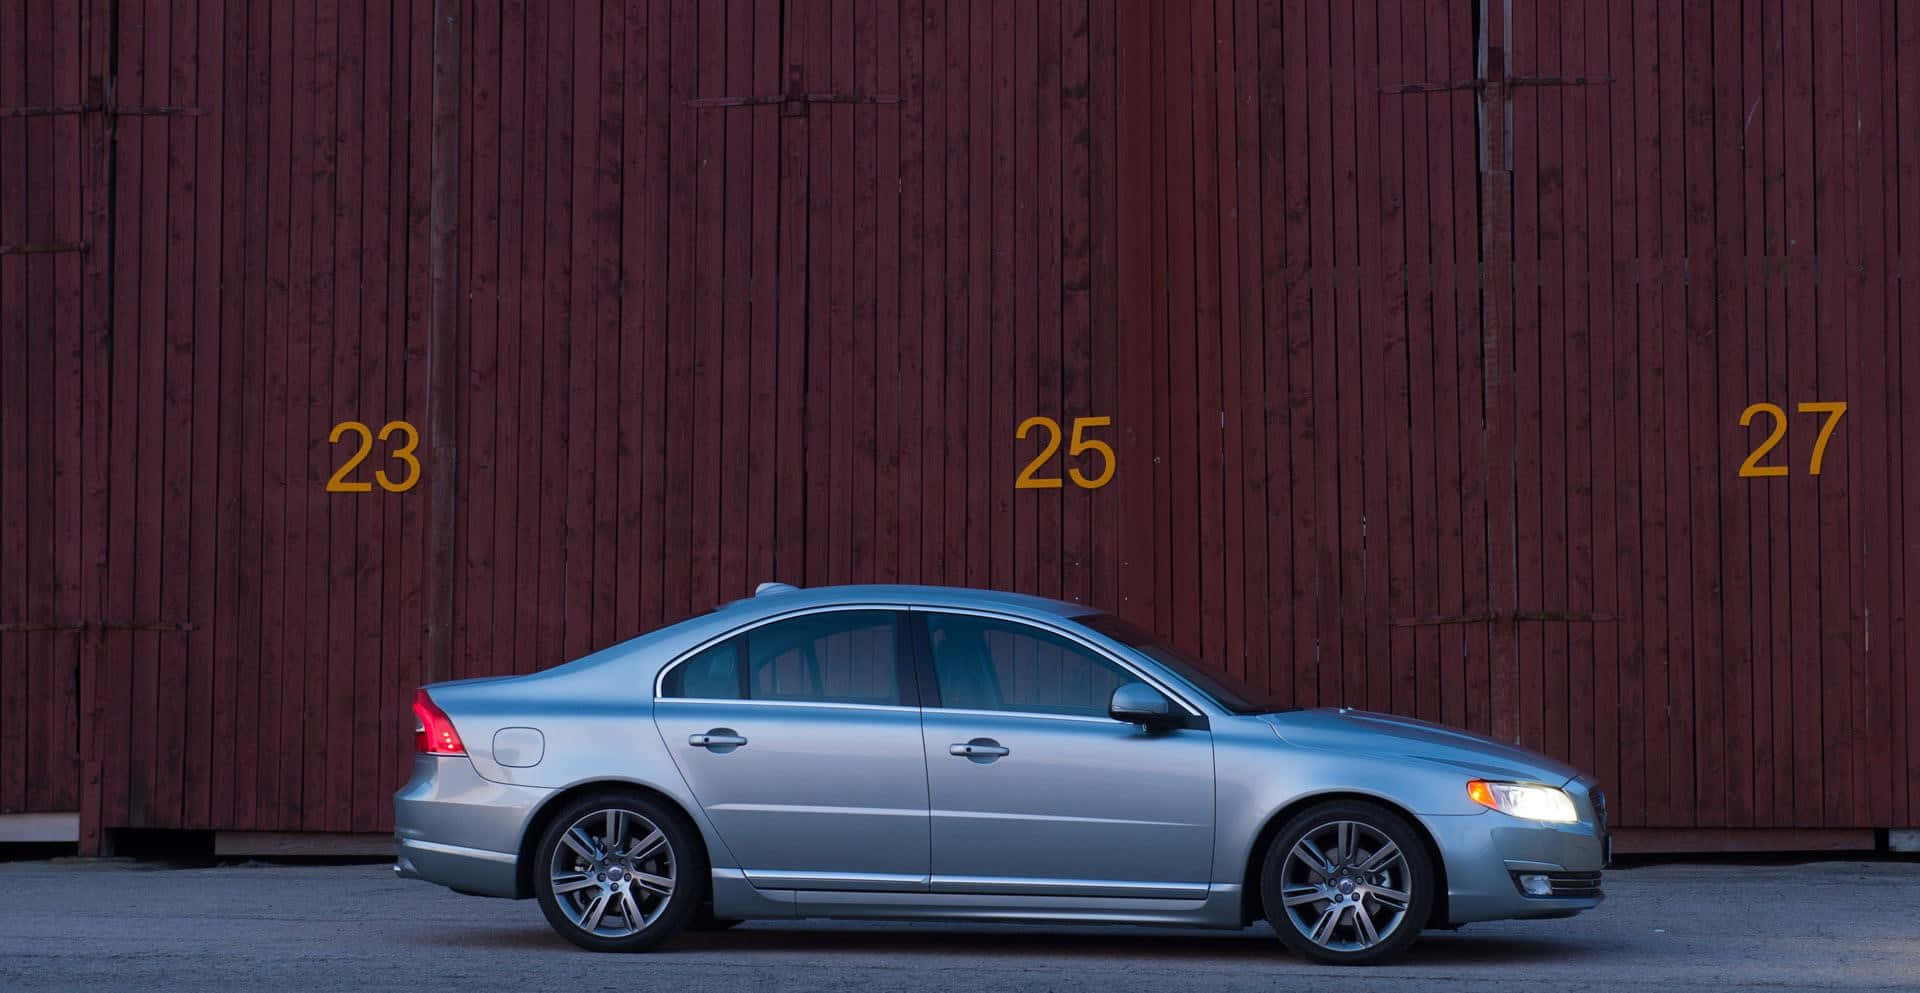 Volvo S80 - Luxury And Elegance In Motion Wallpaper